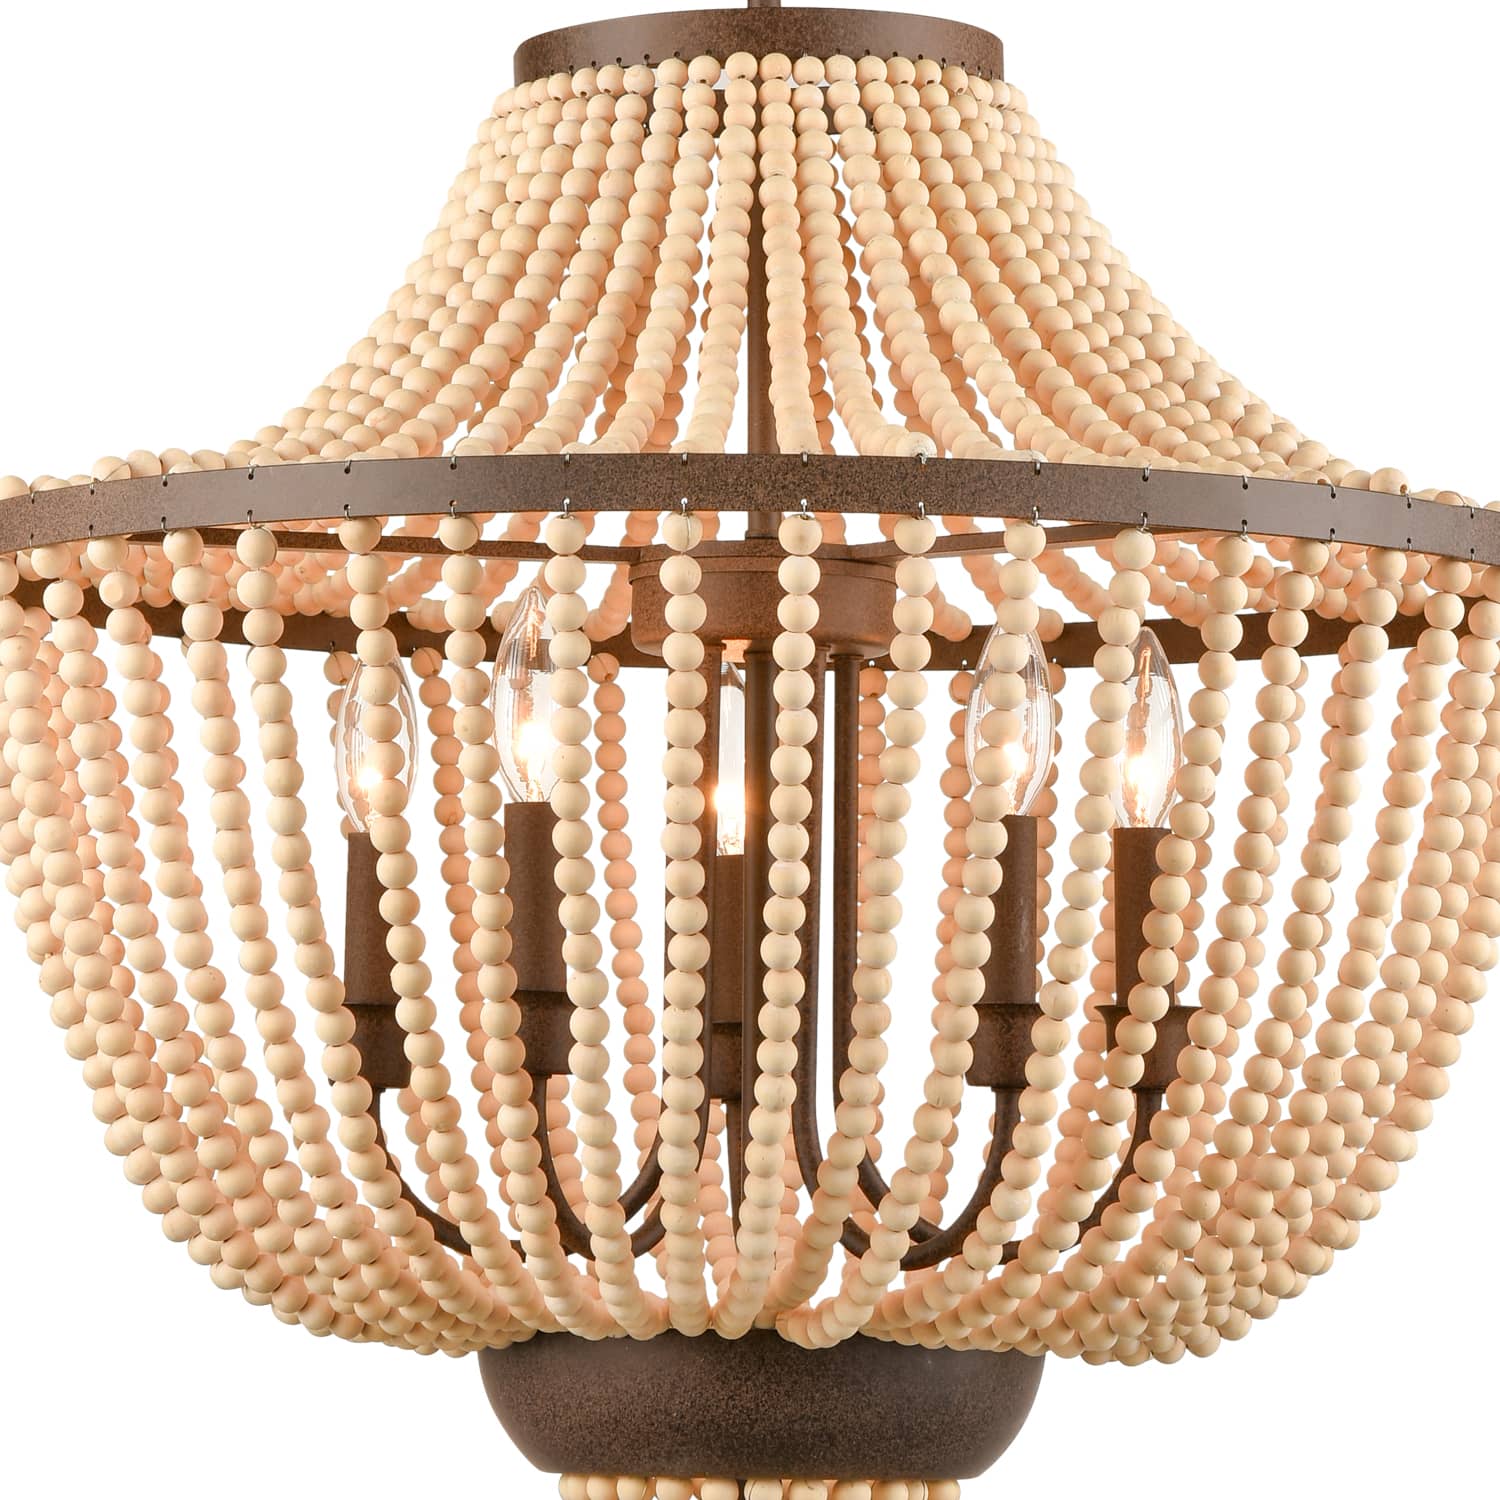 Rustic Wood Beaded Chandelier Candle Style Empire Shape - 5 Light